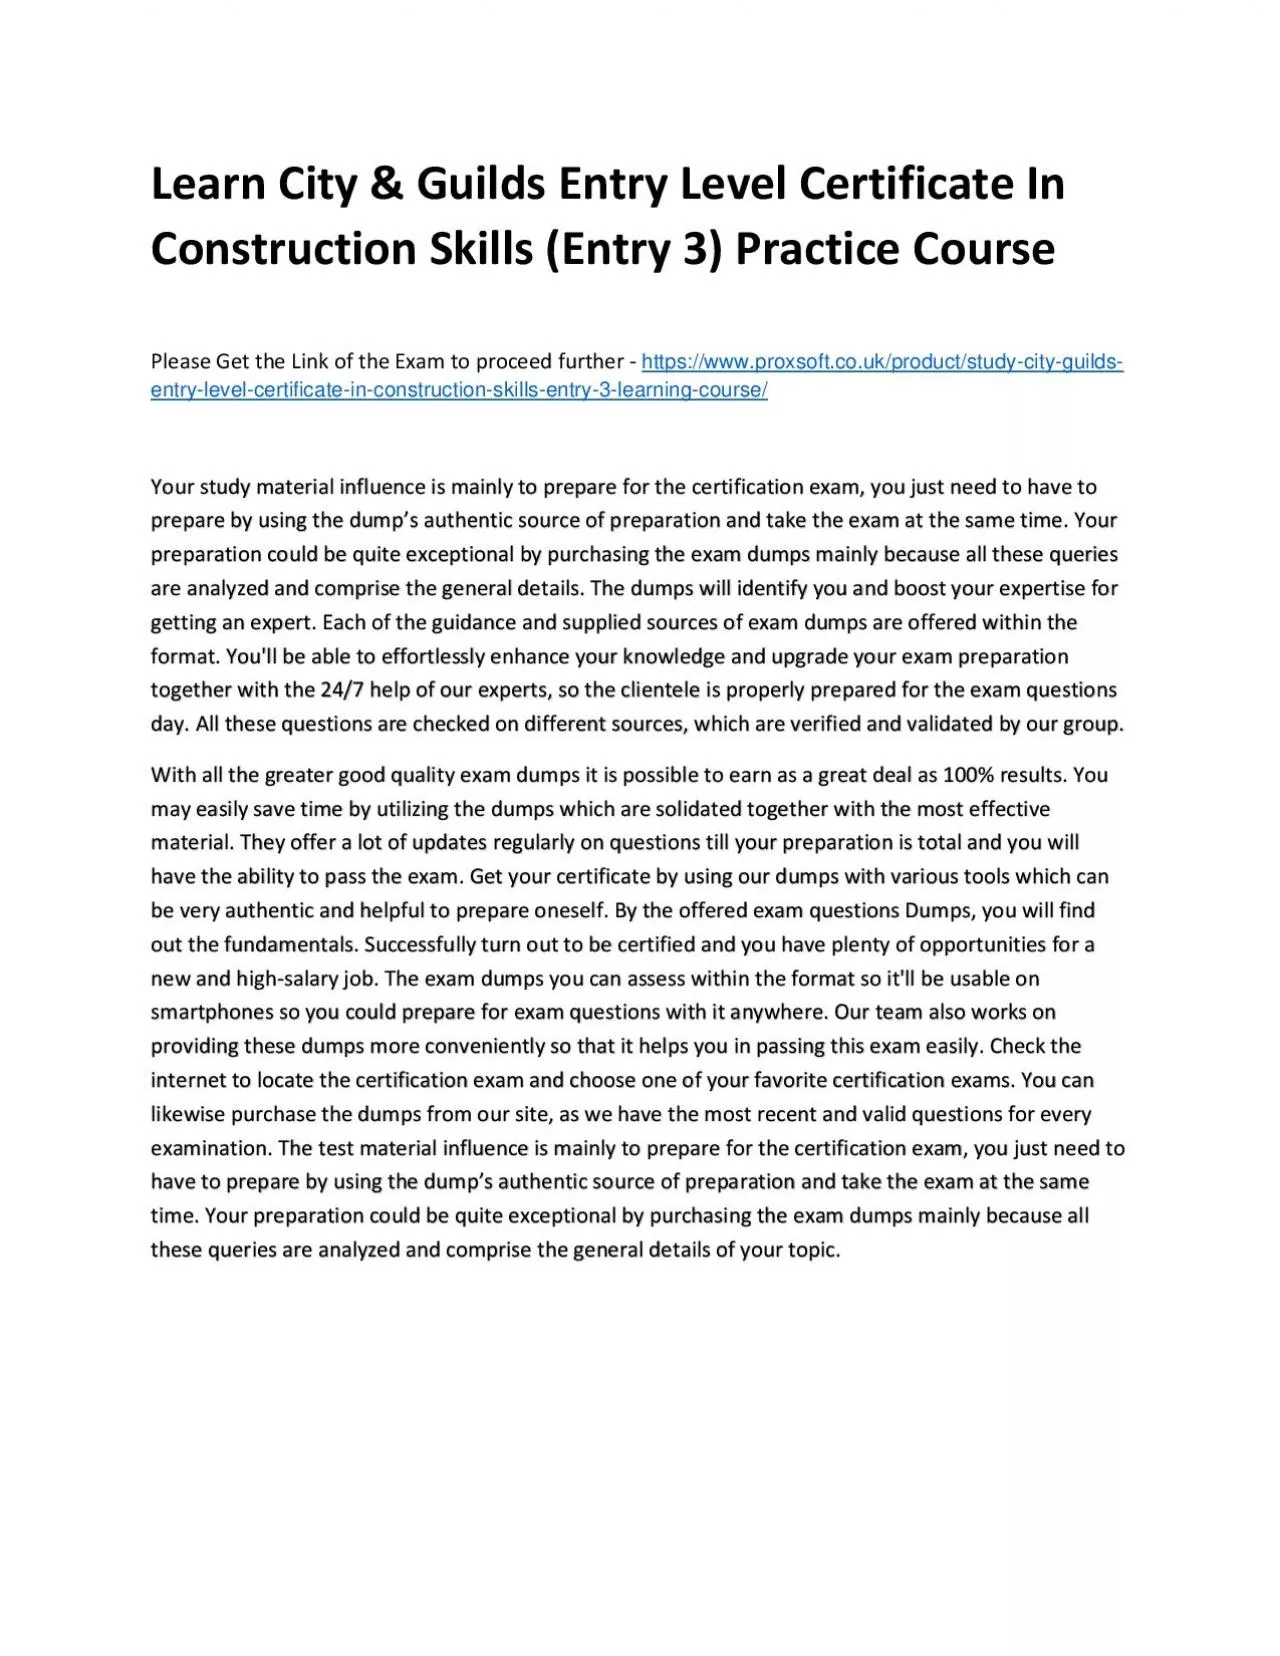 Learn City & Guilds Entry Level Certificate In Construction Skills (Entry 3) Practice